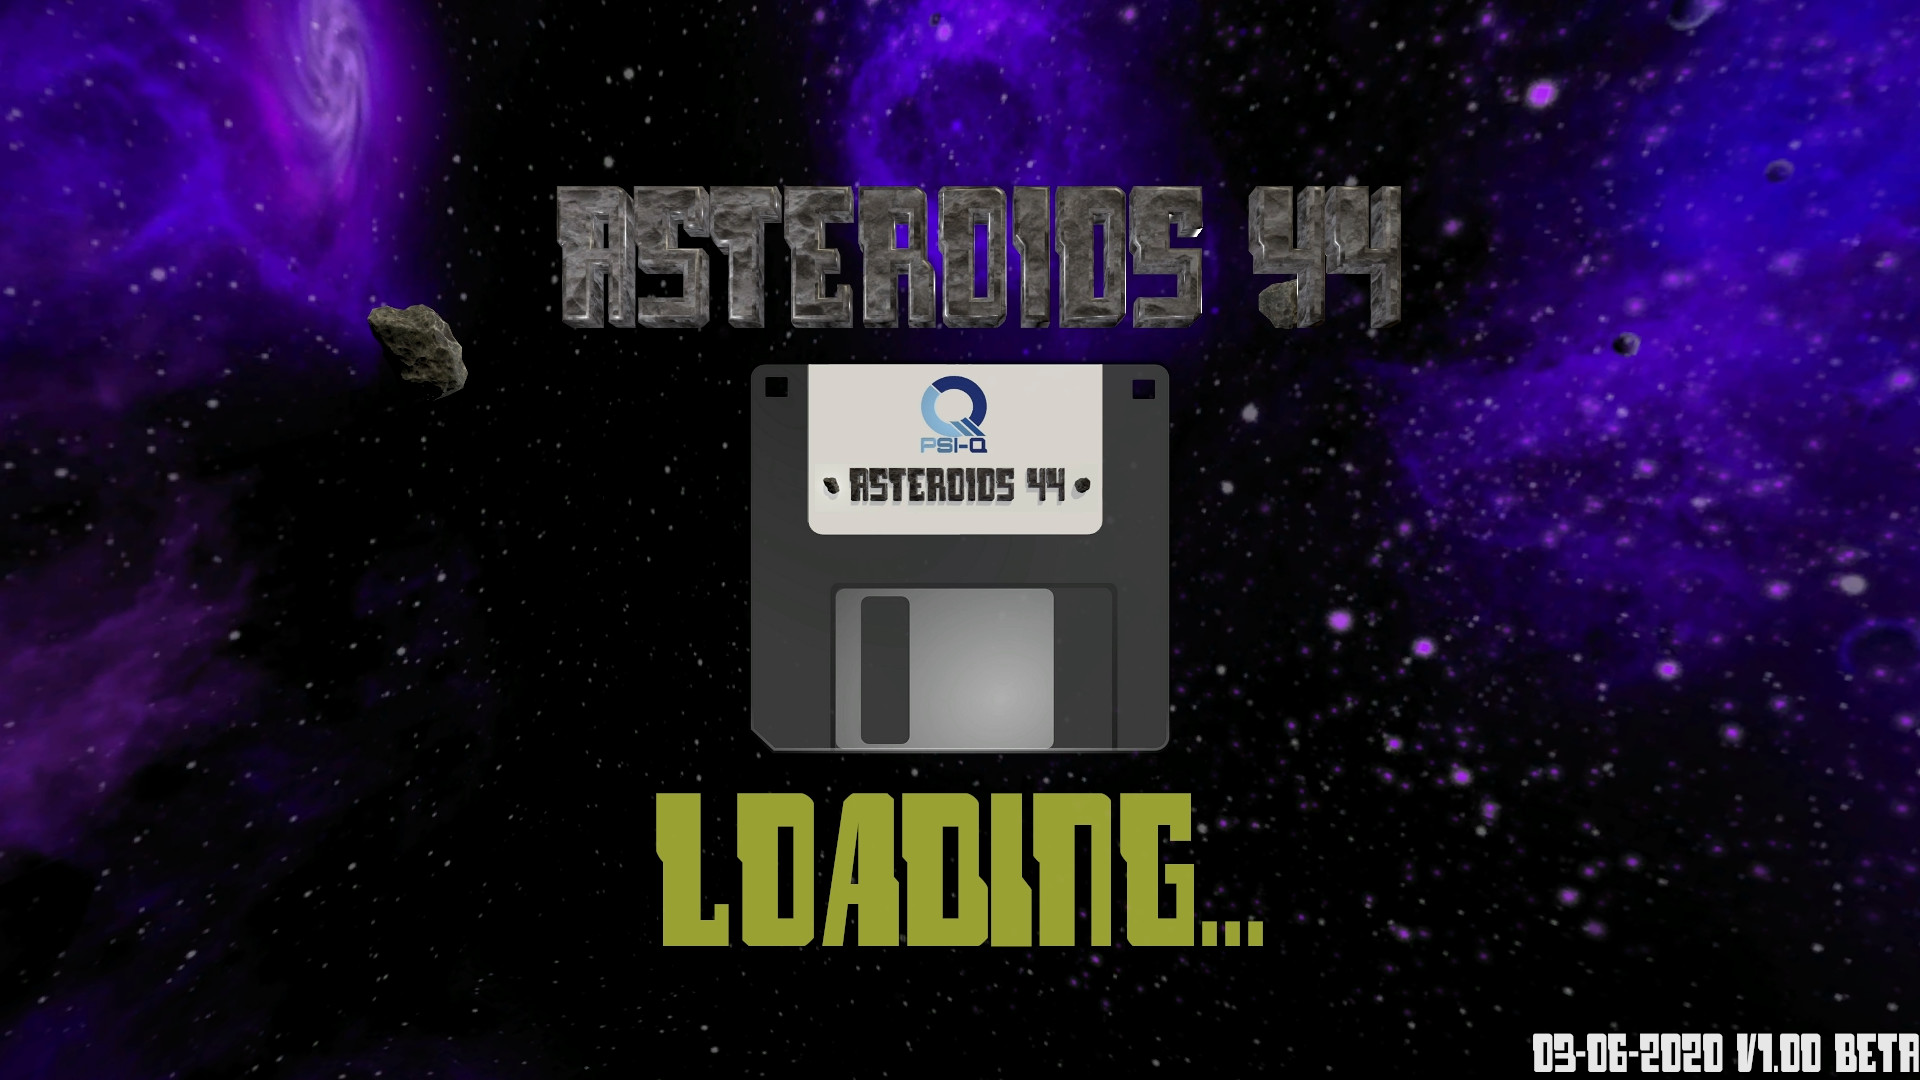 Asteroids 44 (For Four) screenshot